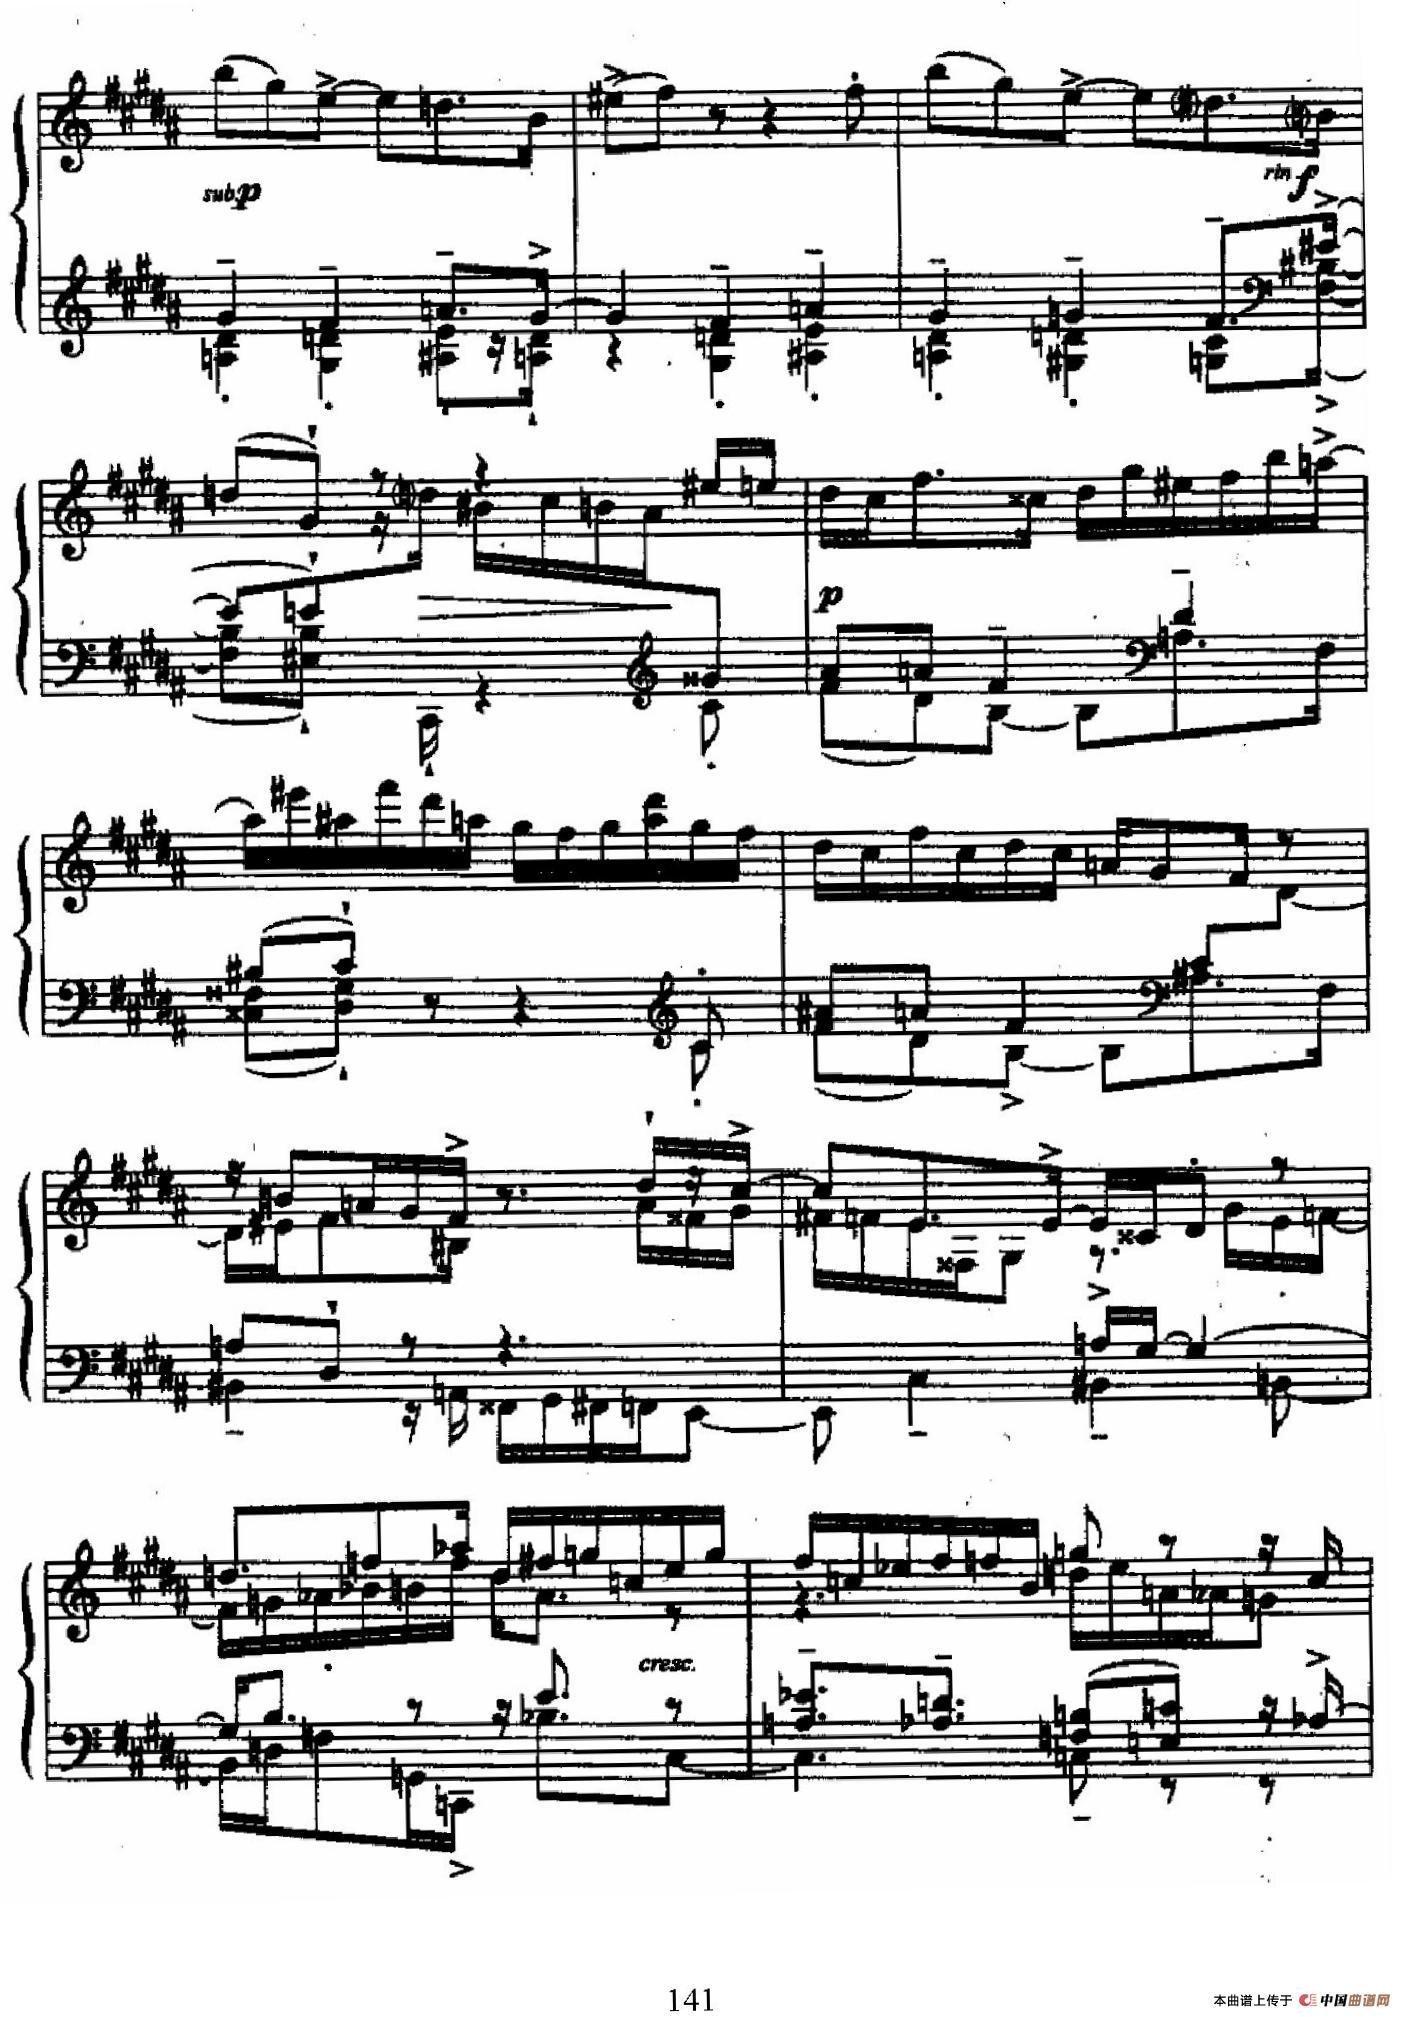 24 Preludes and Fugues Op.82（24首前奏曲与赋格·15）